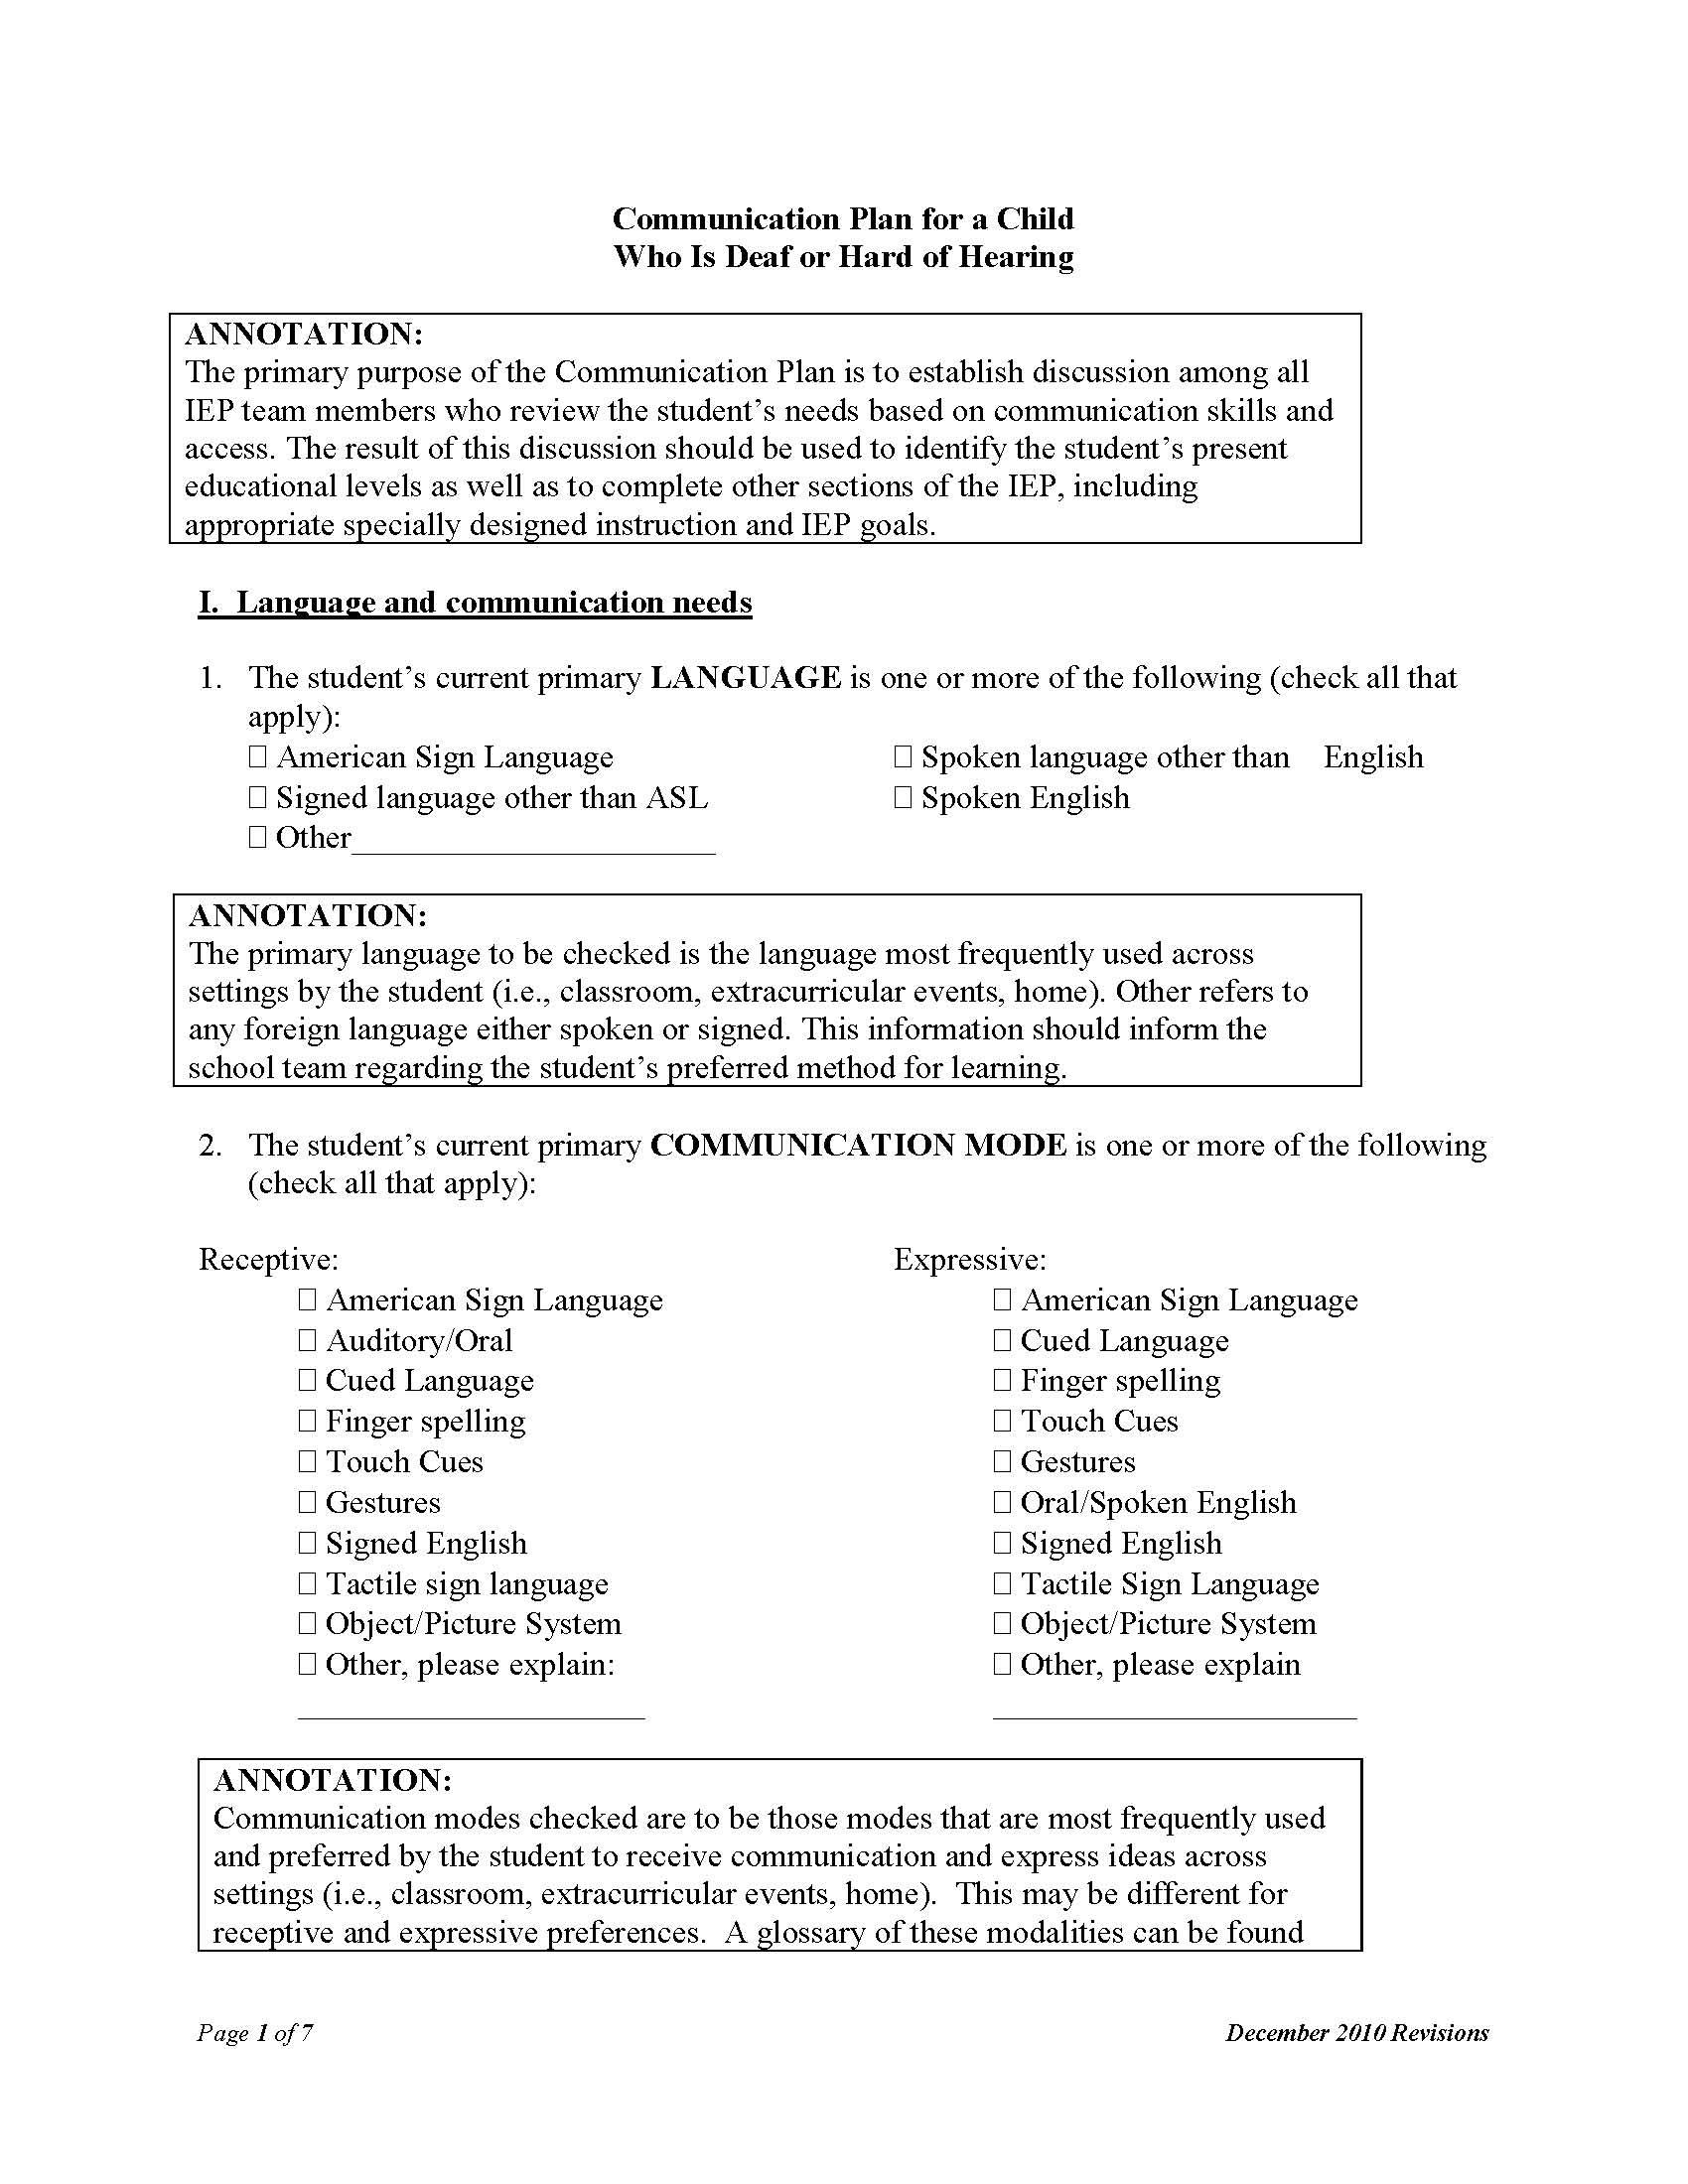 Communication Plan for a Child Who Is Deaf or Hard of Hearing (Annotated) - School Age